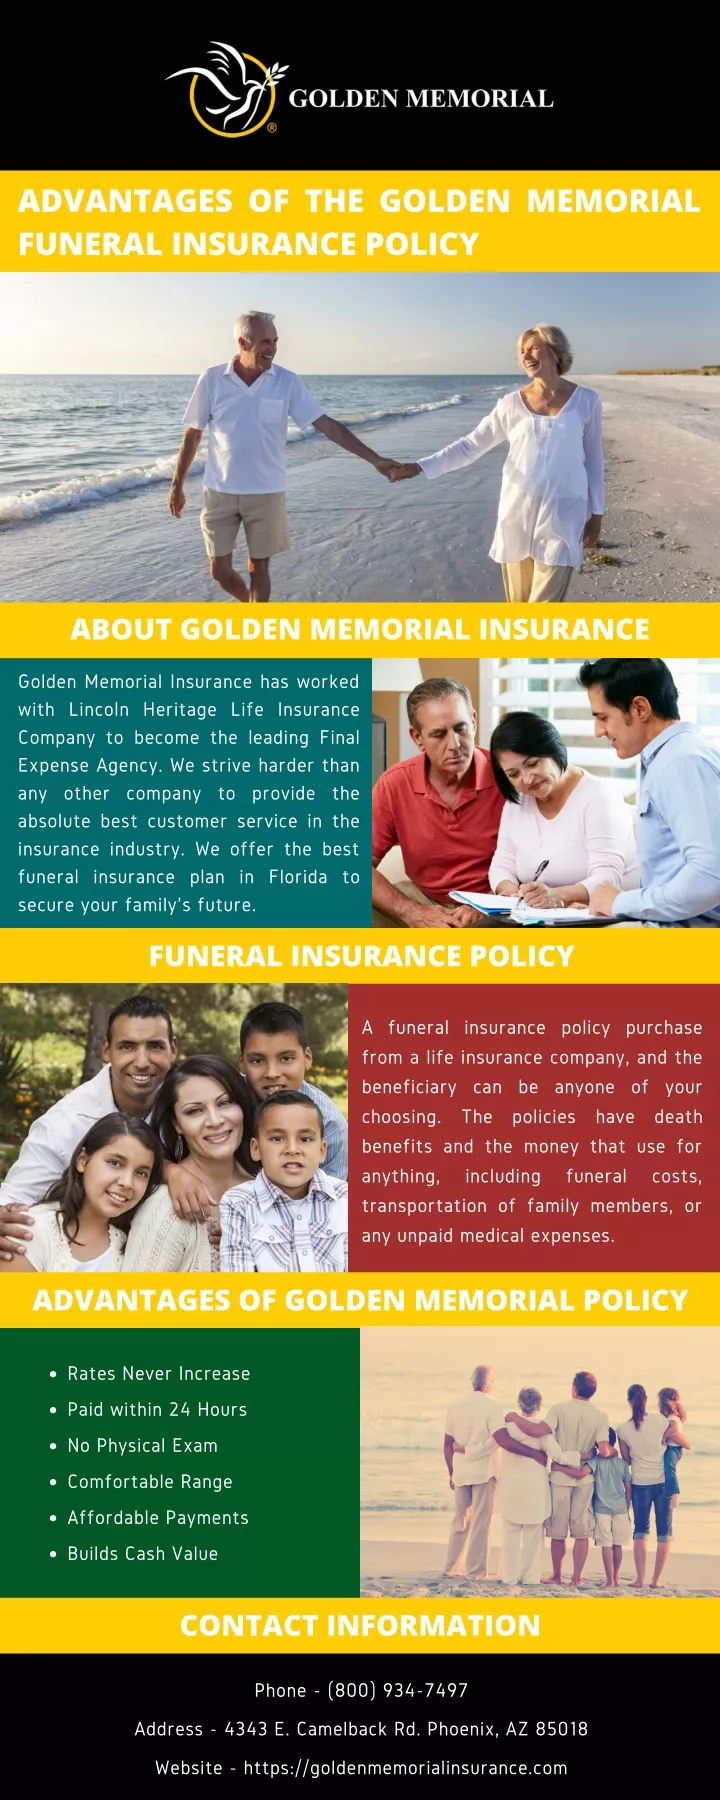 advantages of the golden memorial funeral